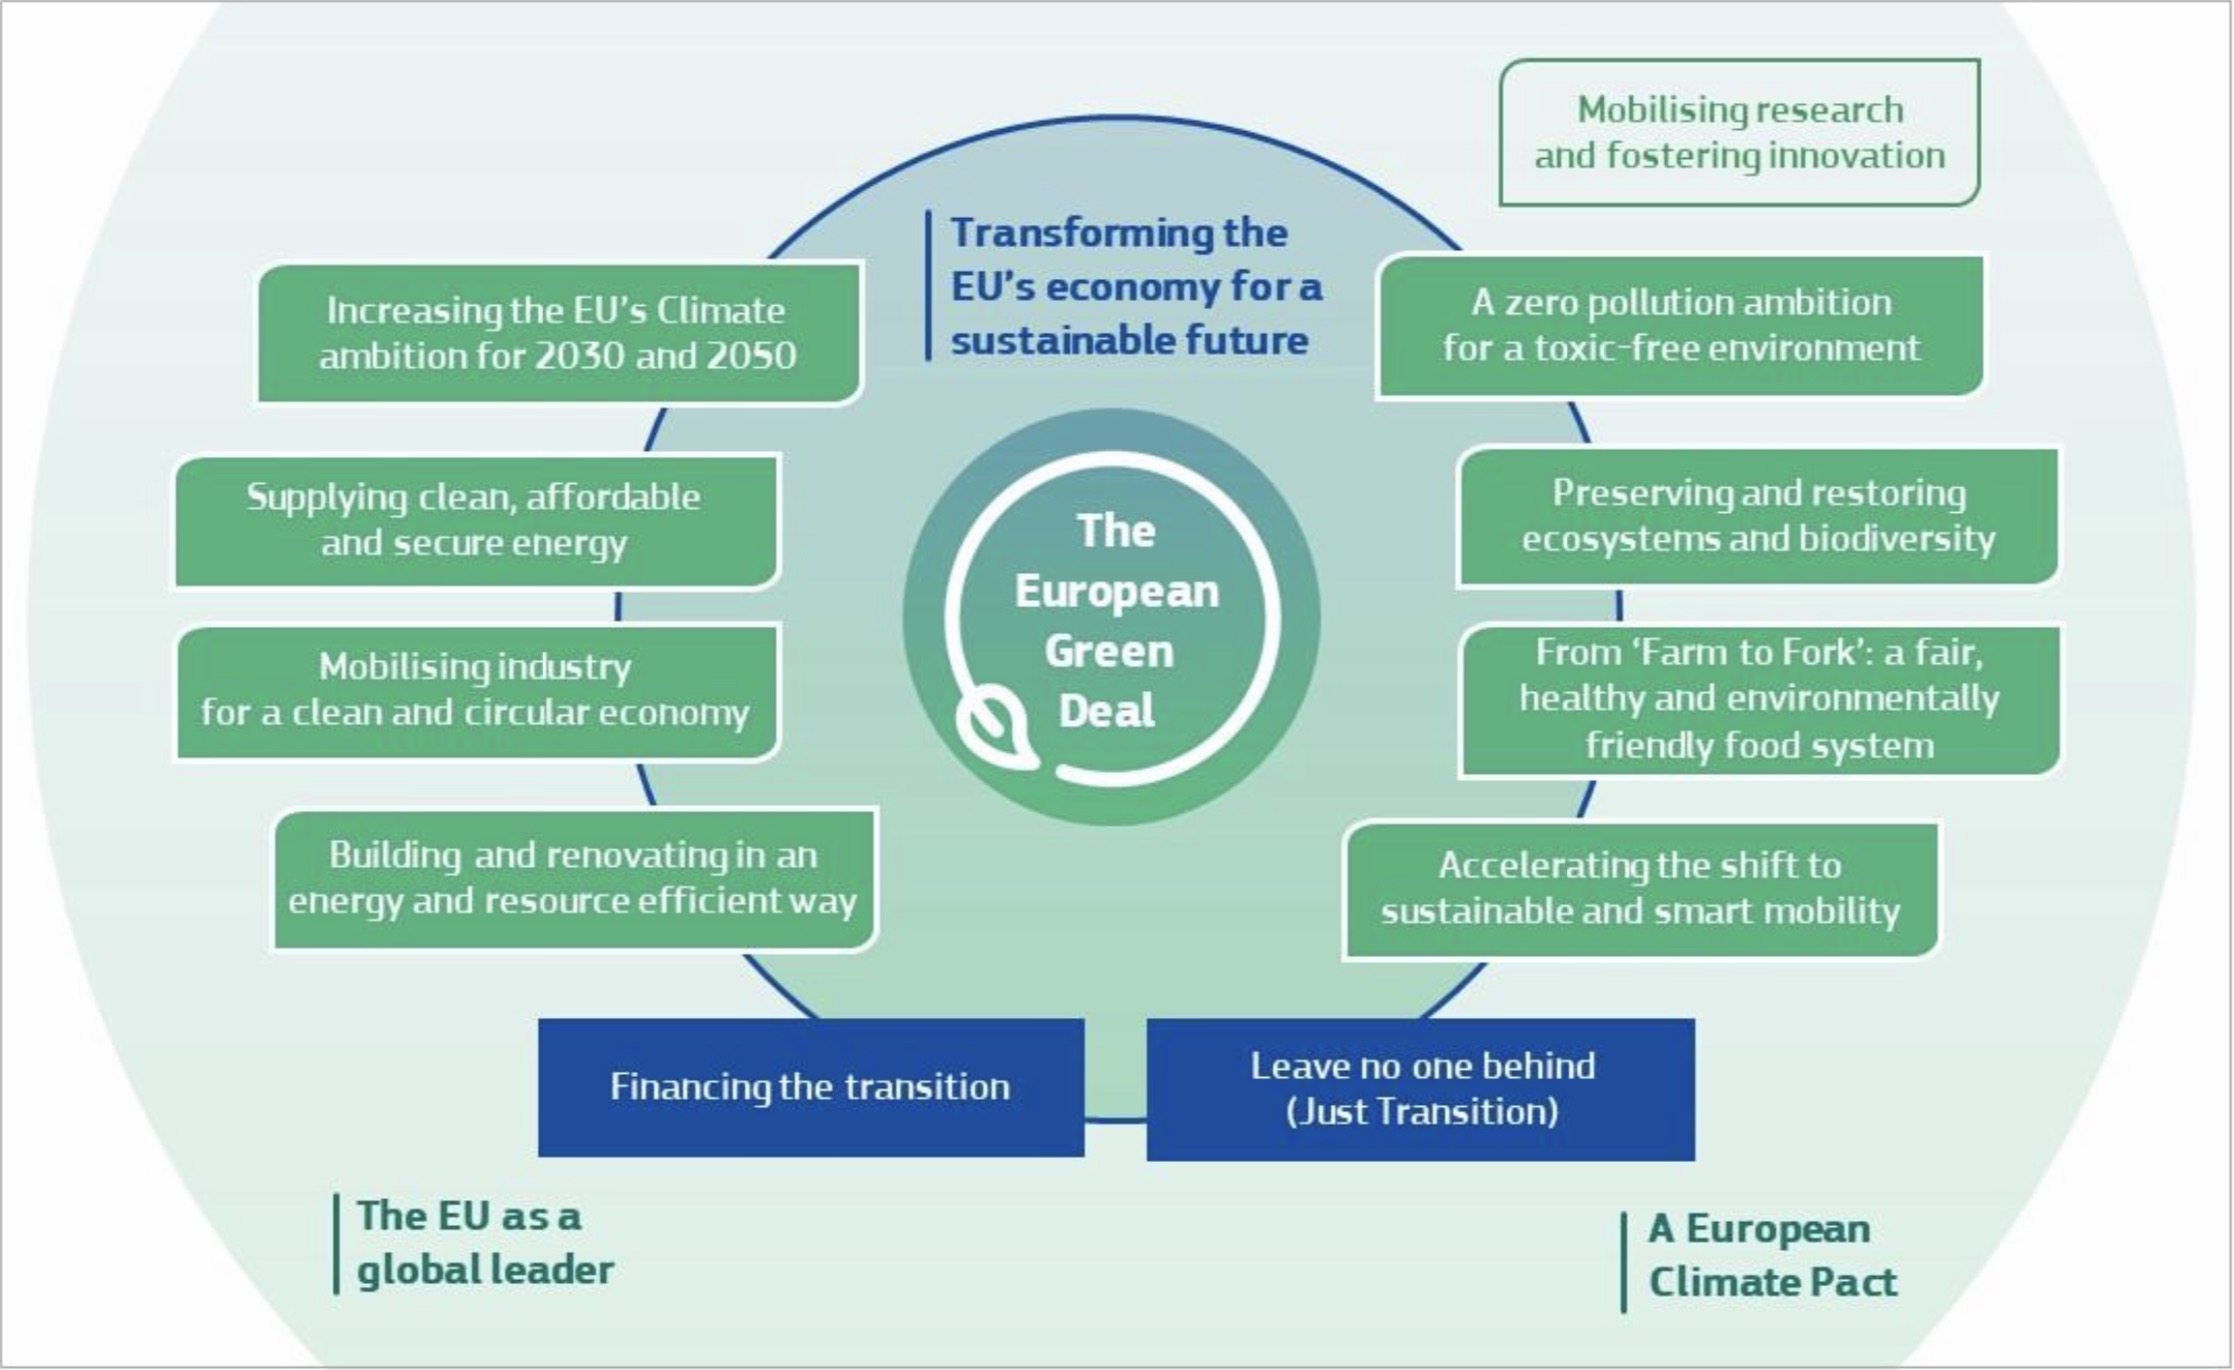 Planners say it supports the transition of the EU to a fair and prosperous society that responds to the challenges posed by climate change and environmental degradation, improving the quality of life of current and future generations.